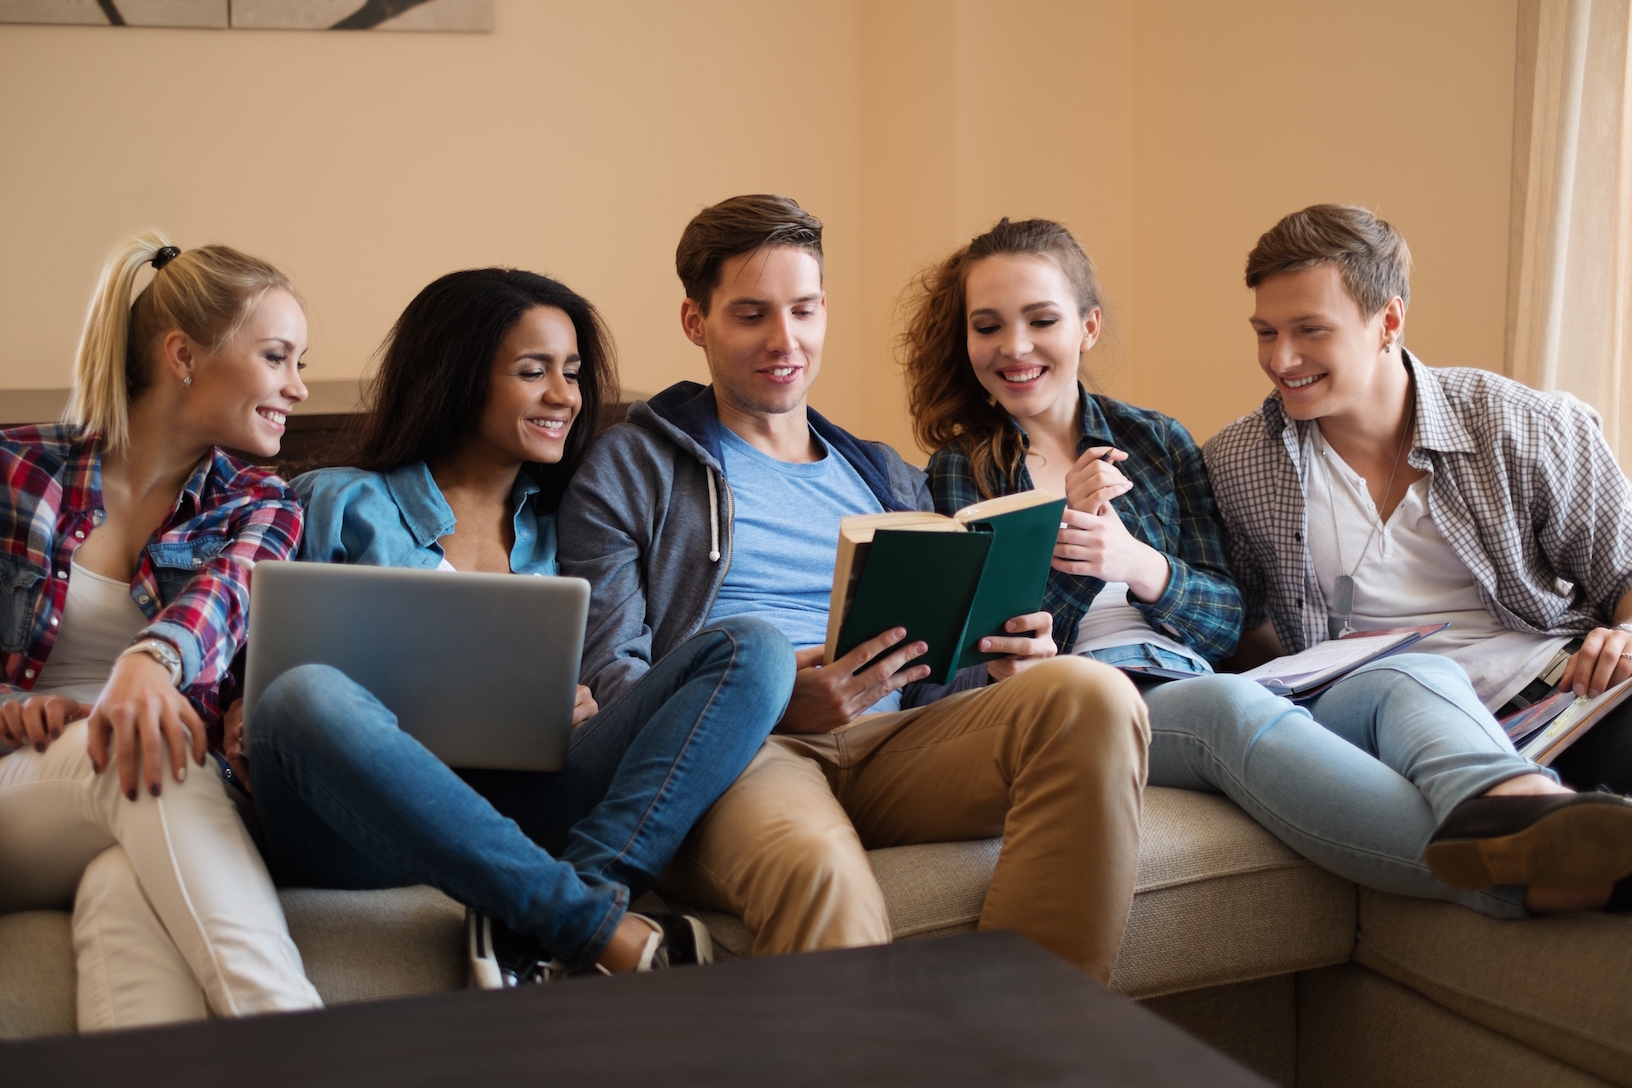 Top Tips for Happy Student House Shares